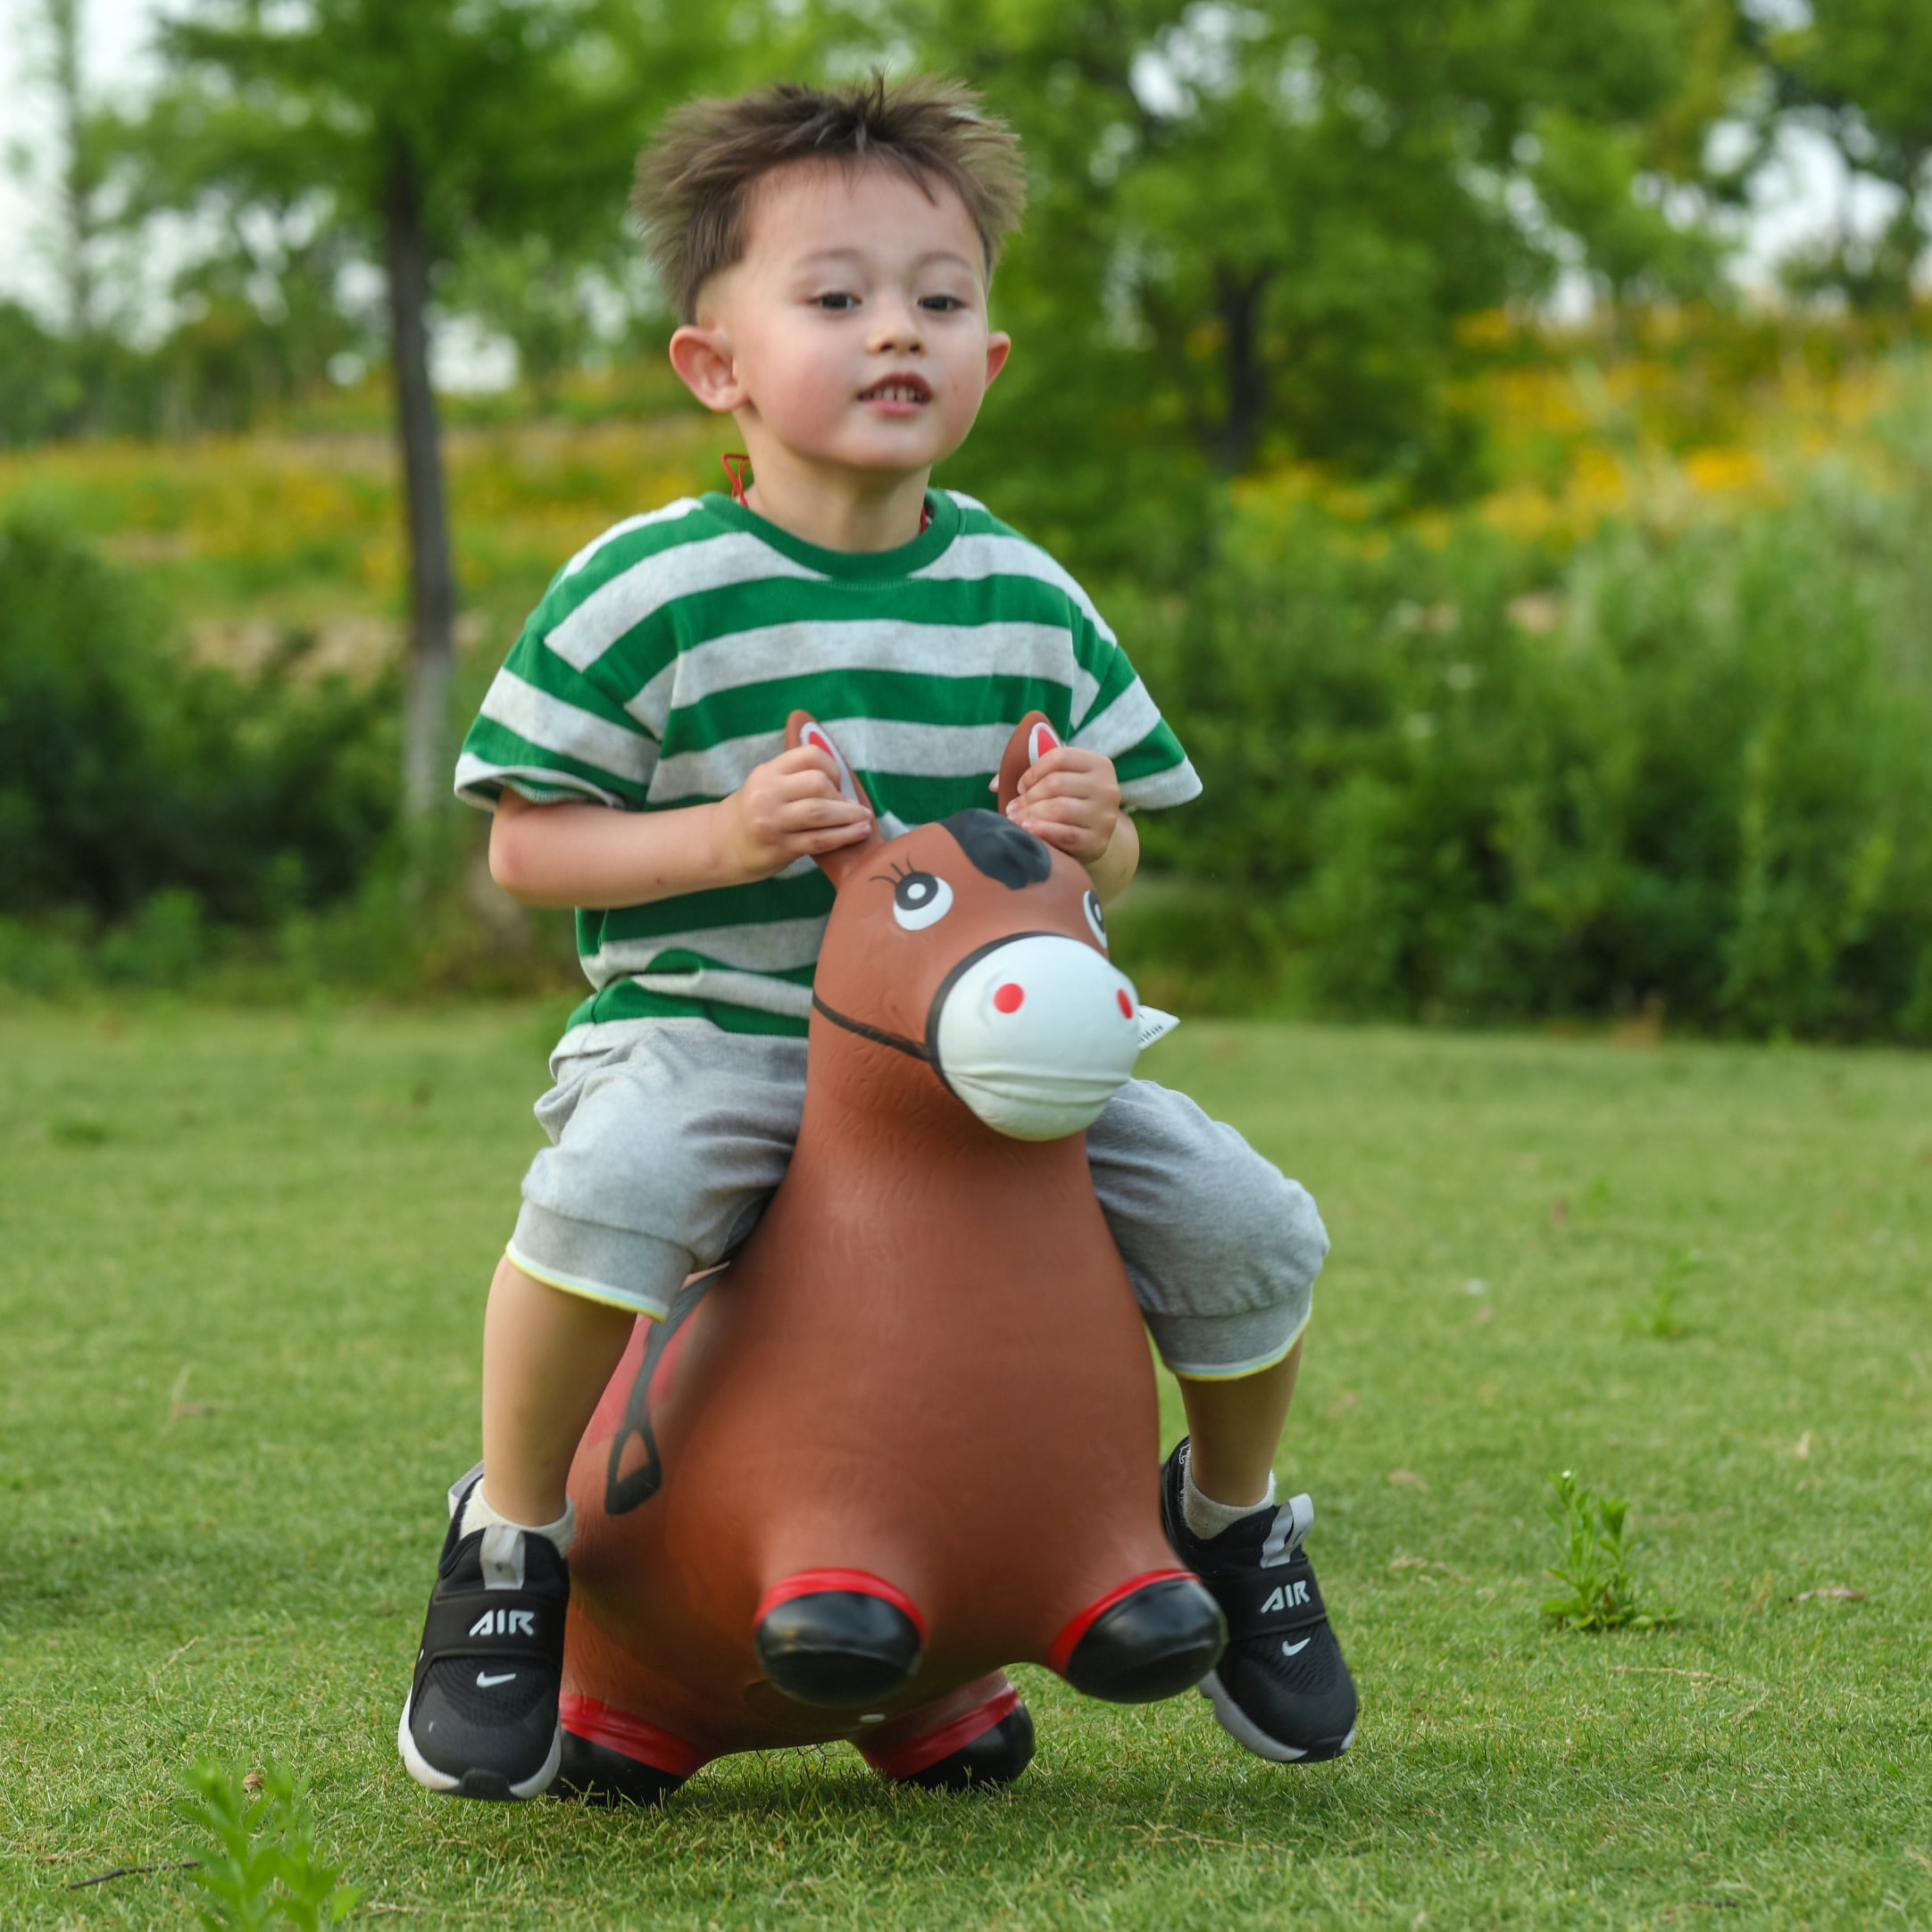 Jumping Horse Bouncy Horse Hopper for Toddlers-Hopping/Hoppity/Bouncing/Bounce Horse Pump Included Inflatable Ride-on Animal Toy for Kids/ Children/ Boys/ Girls